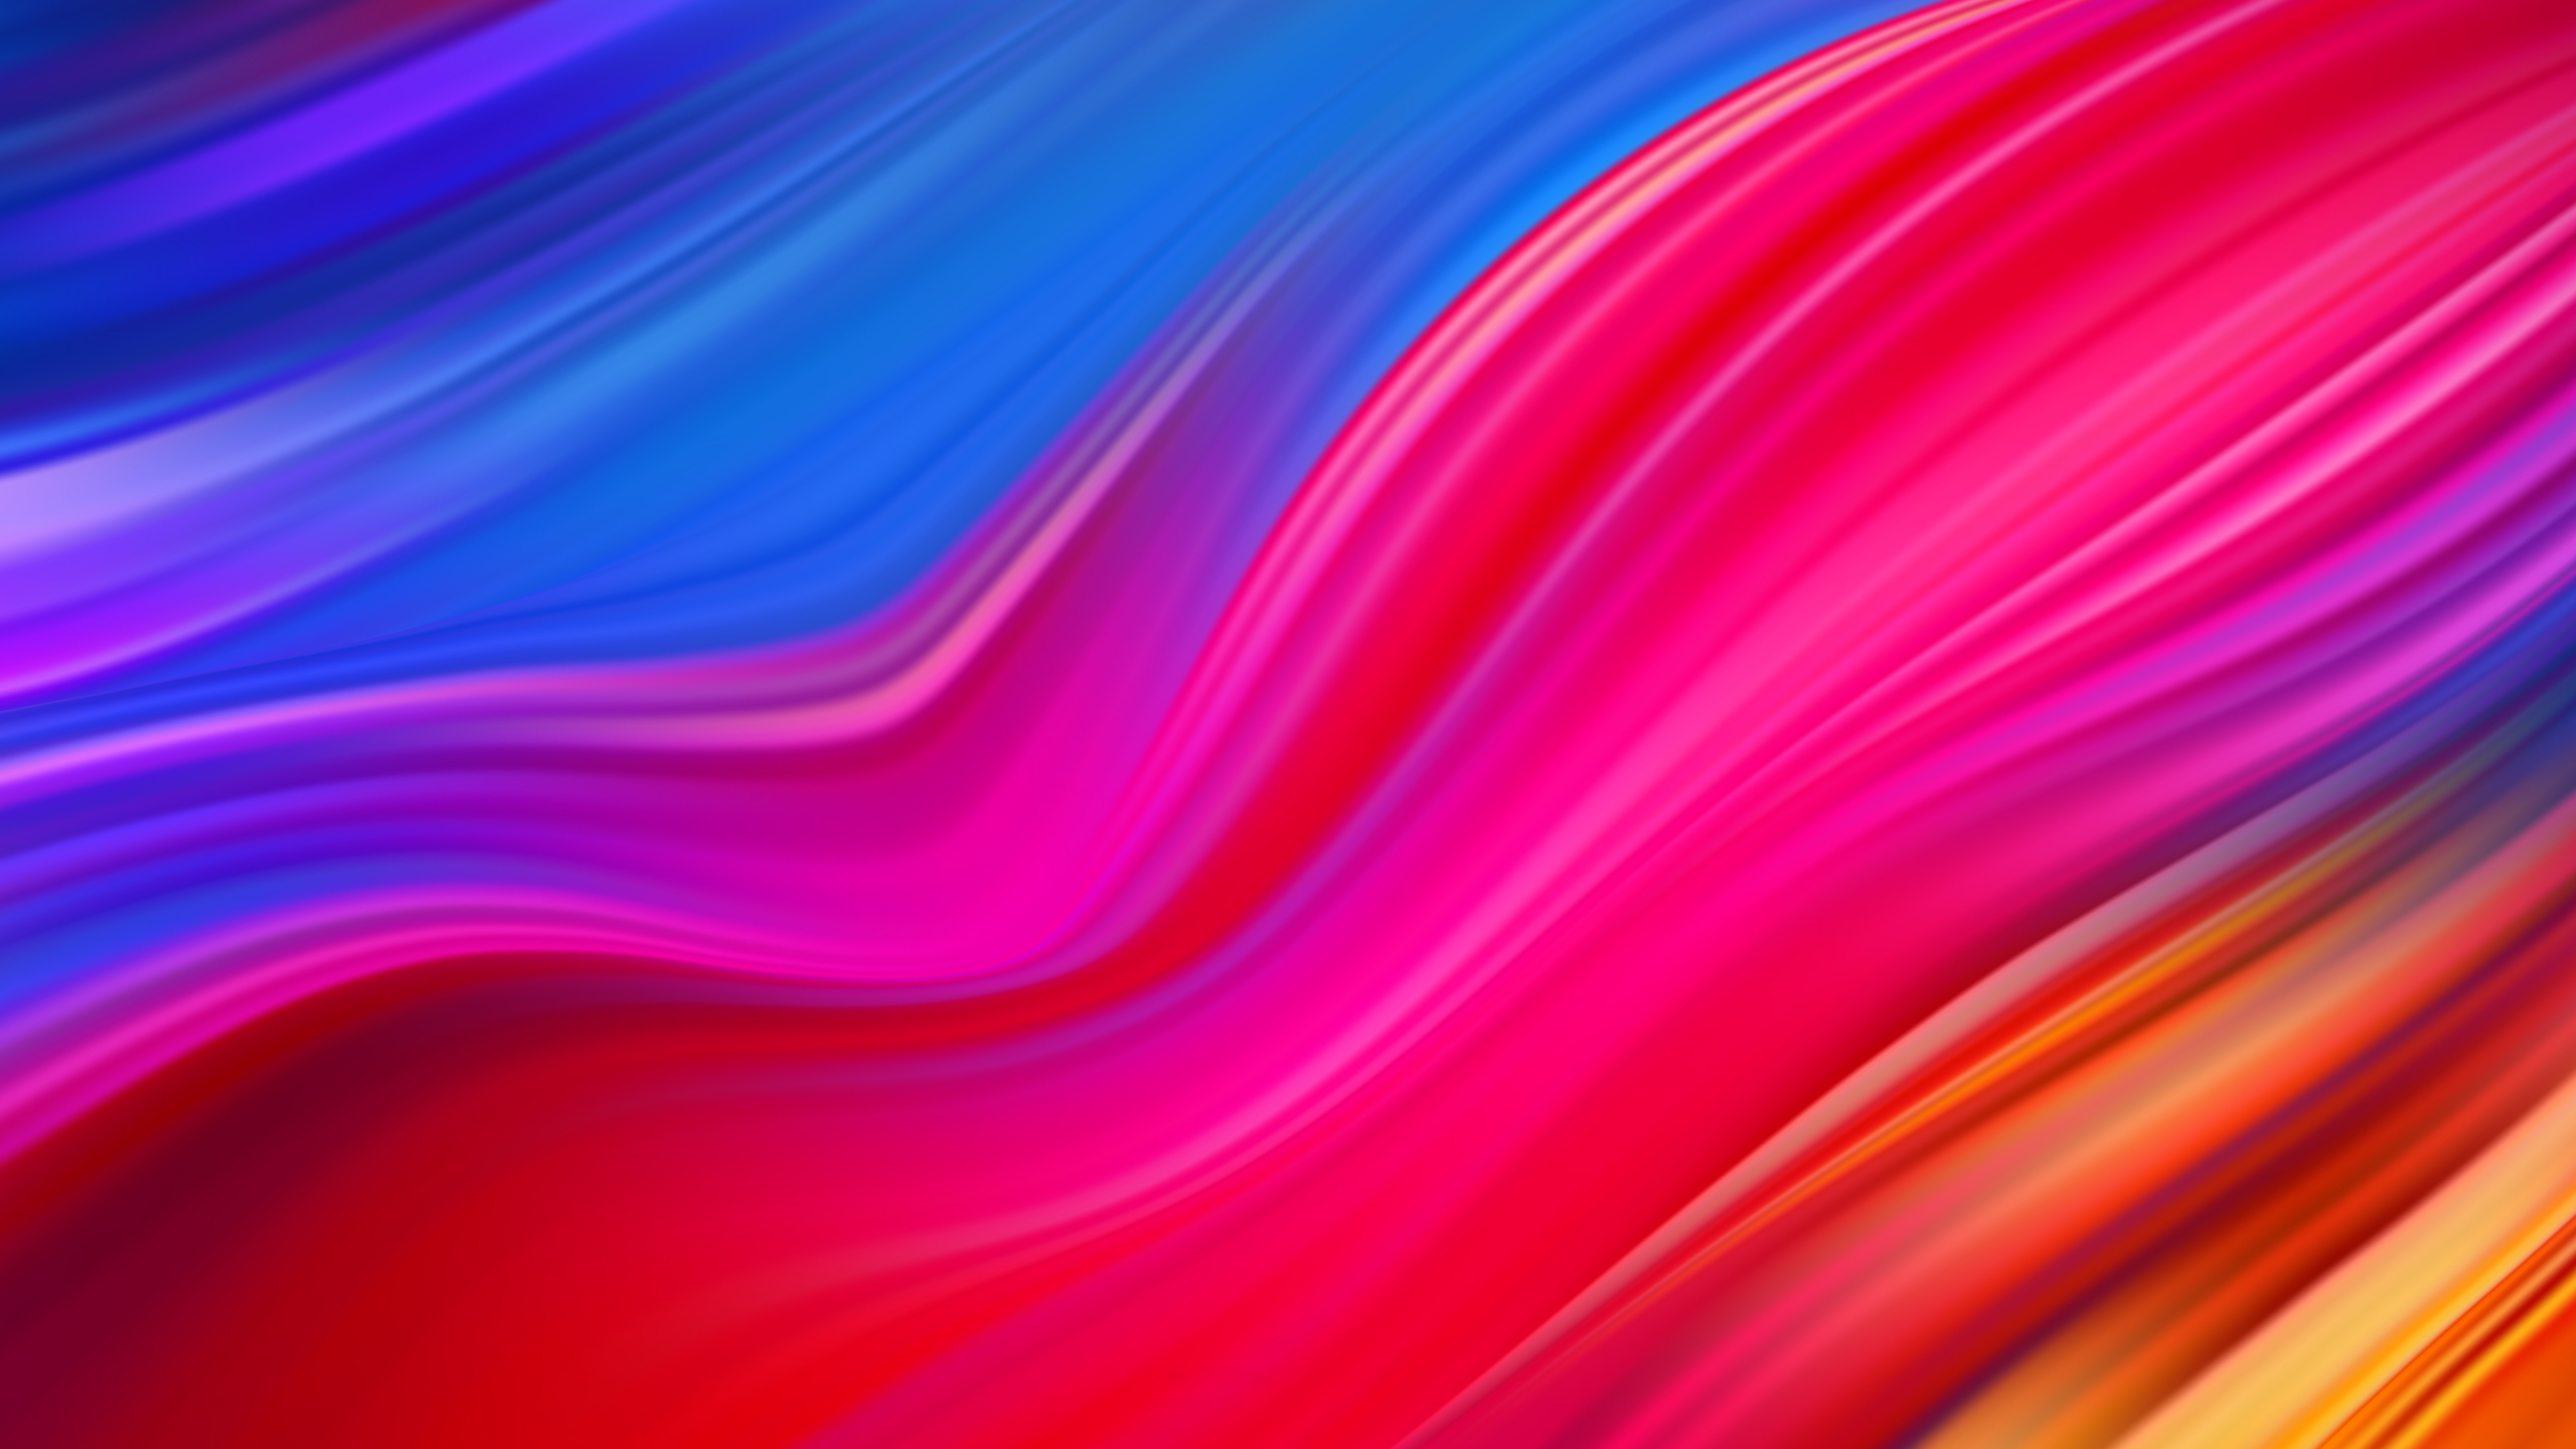 7680x4320 8k Abstract Colorful 8k HD 4k Wallpapers, Images, Backgrounds